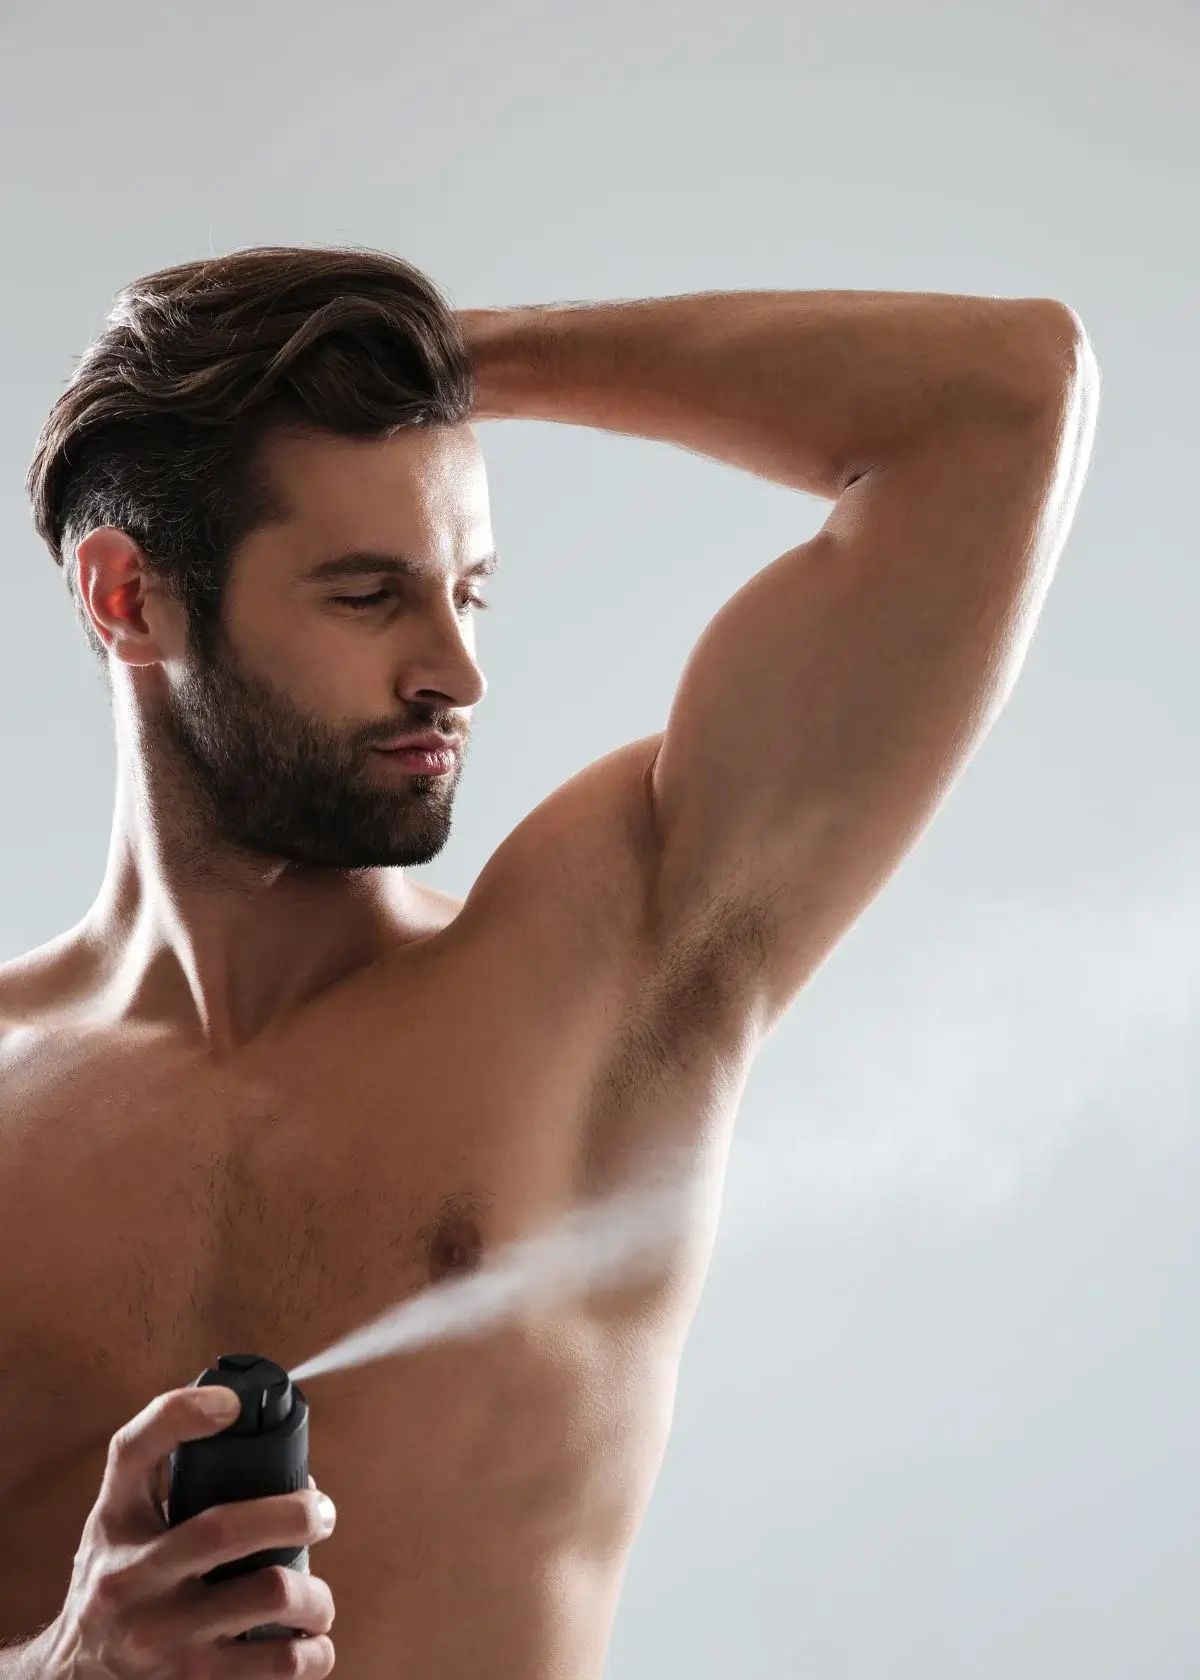 How to Choose the Right Aluminum free Deodorant for Men?